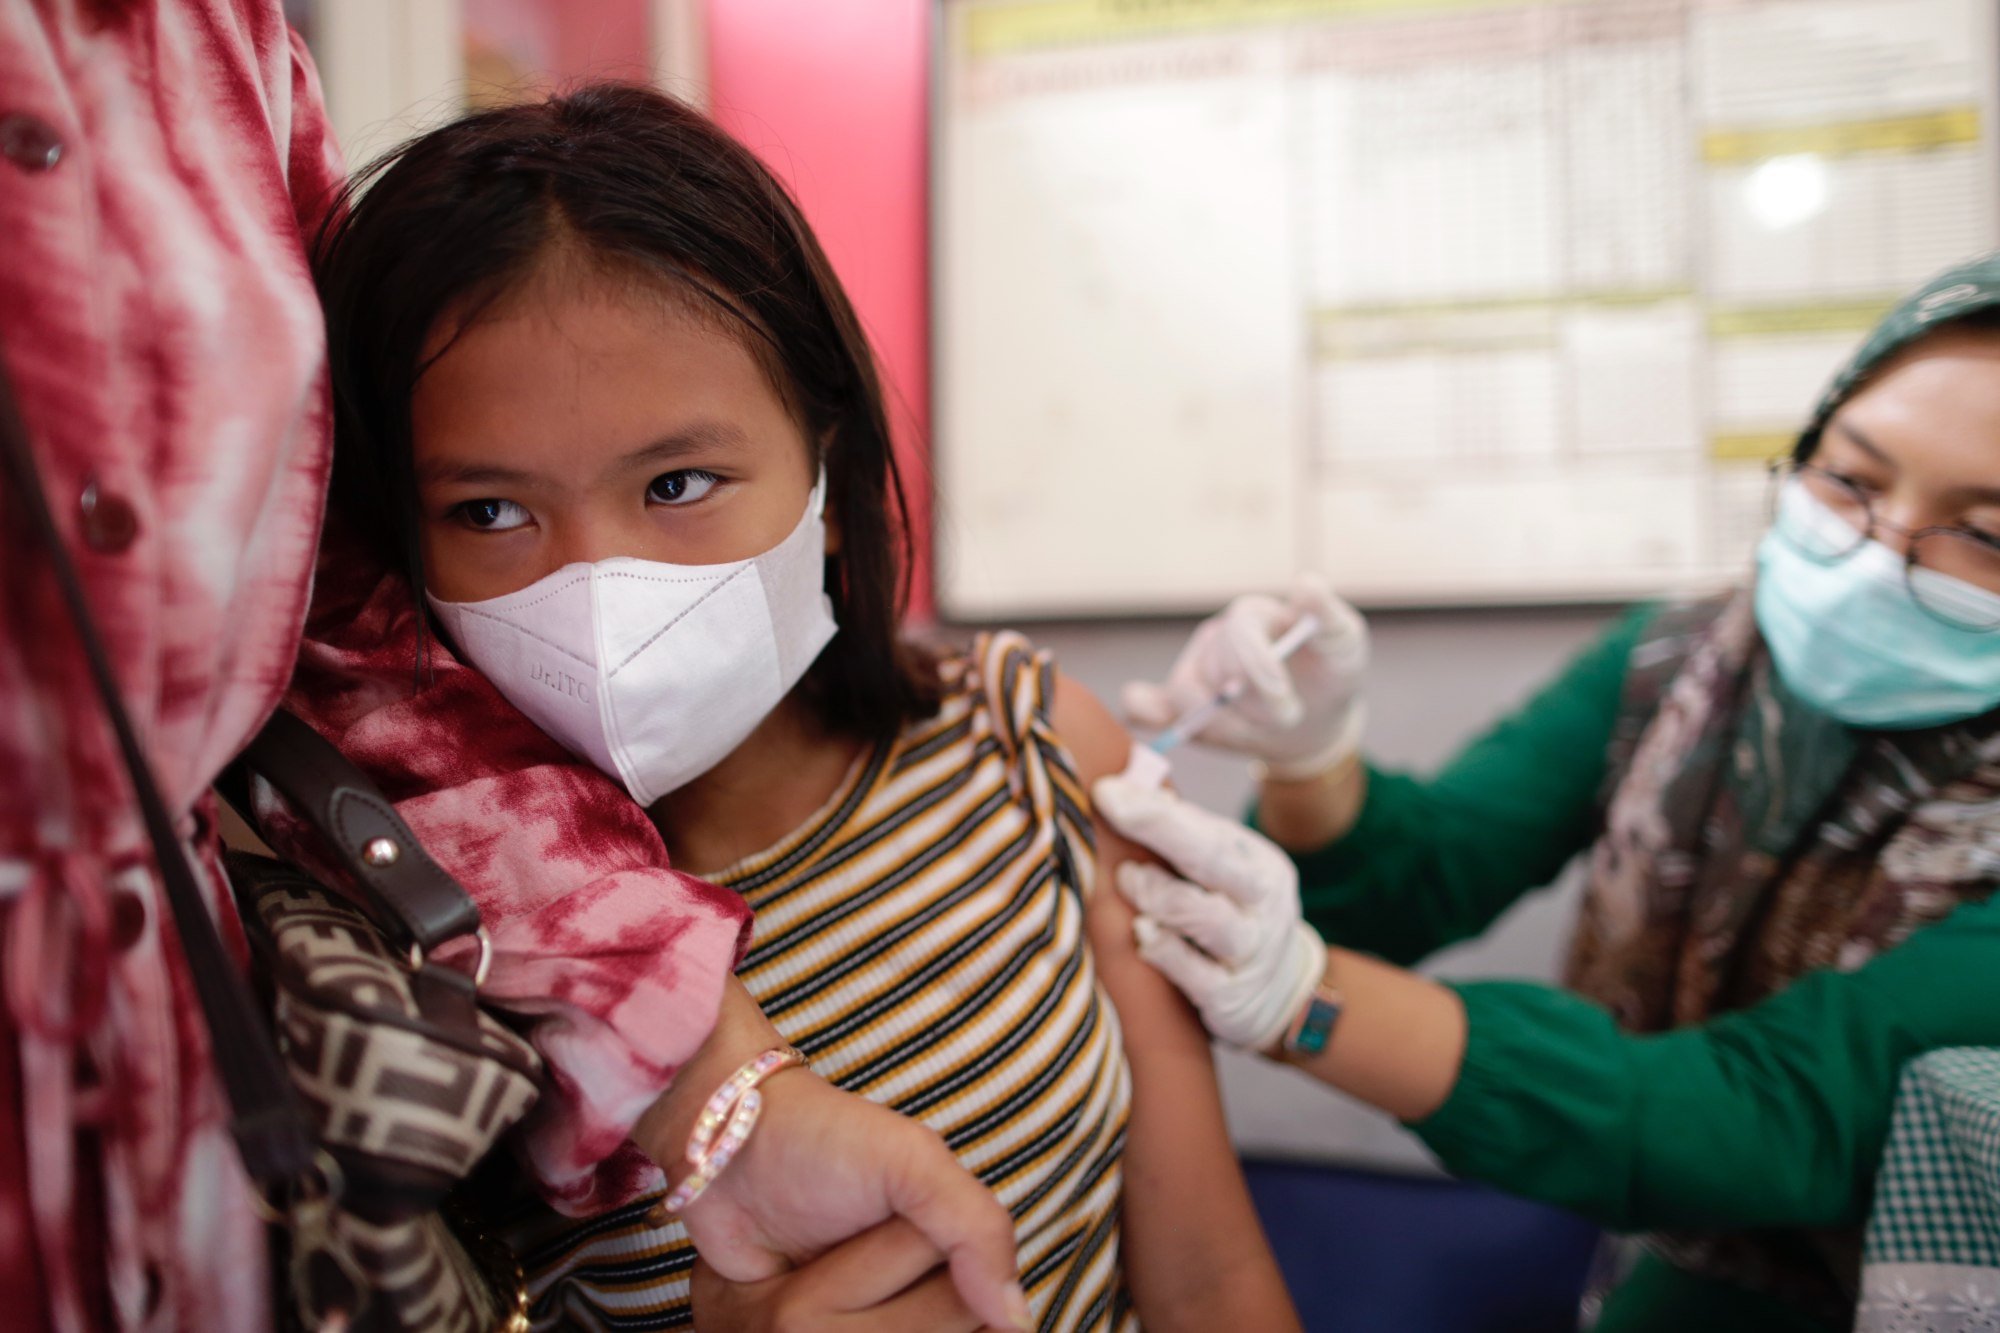 A pupil receives a dose of the Sinovac vaccine during a vaccination drive for children aged six to 11, at a primary school in Tangerang, Indonesia, on January 27. Photo: EPA-EFE